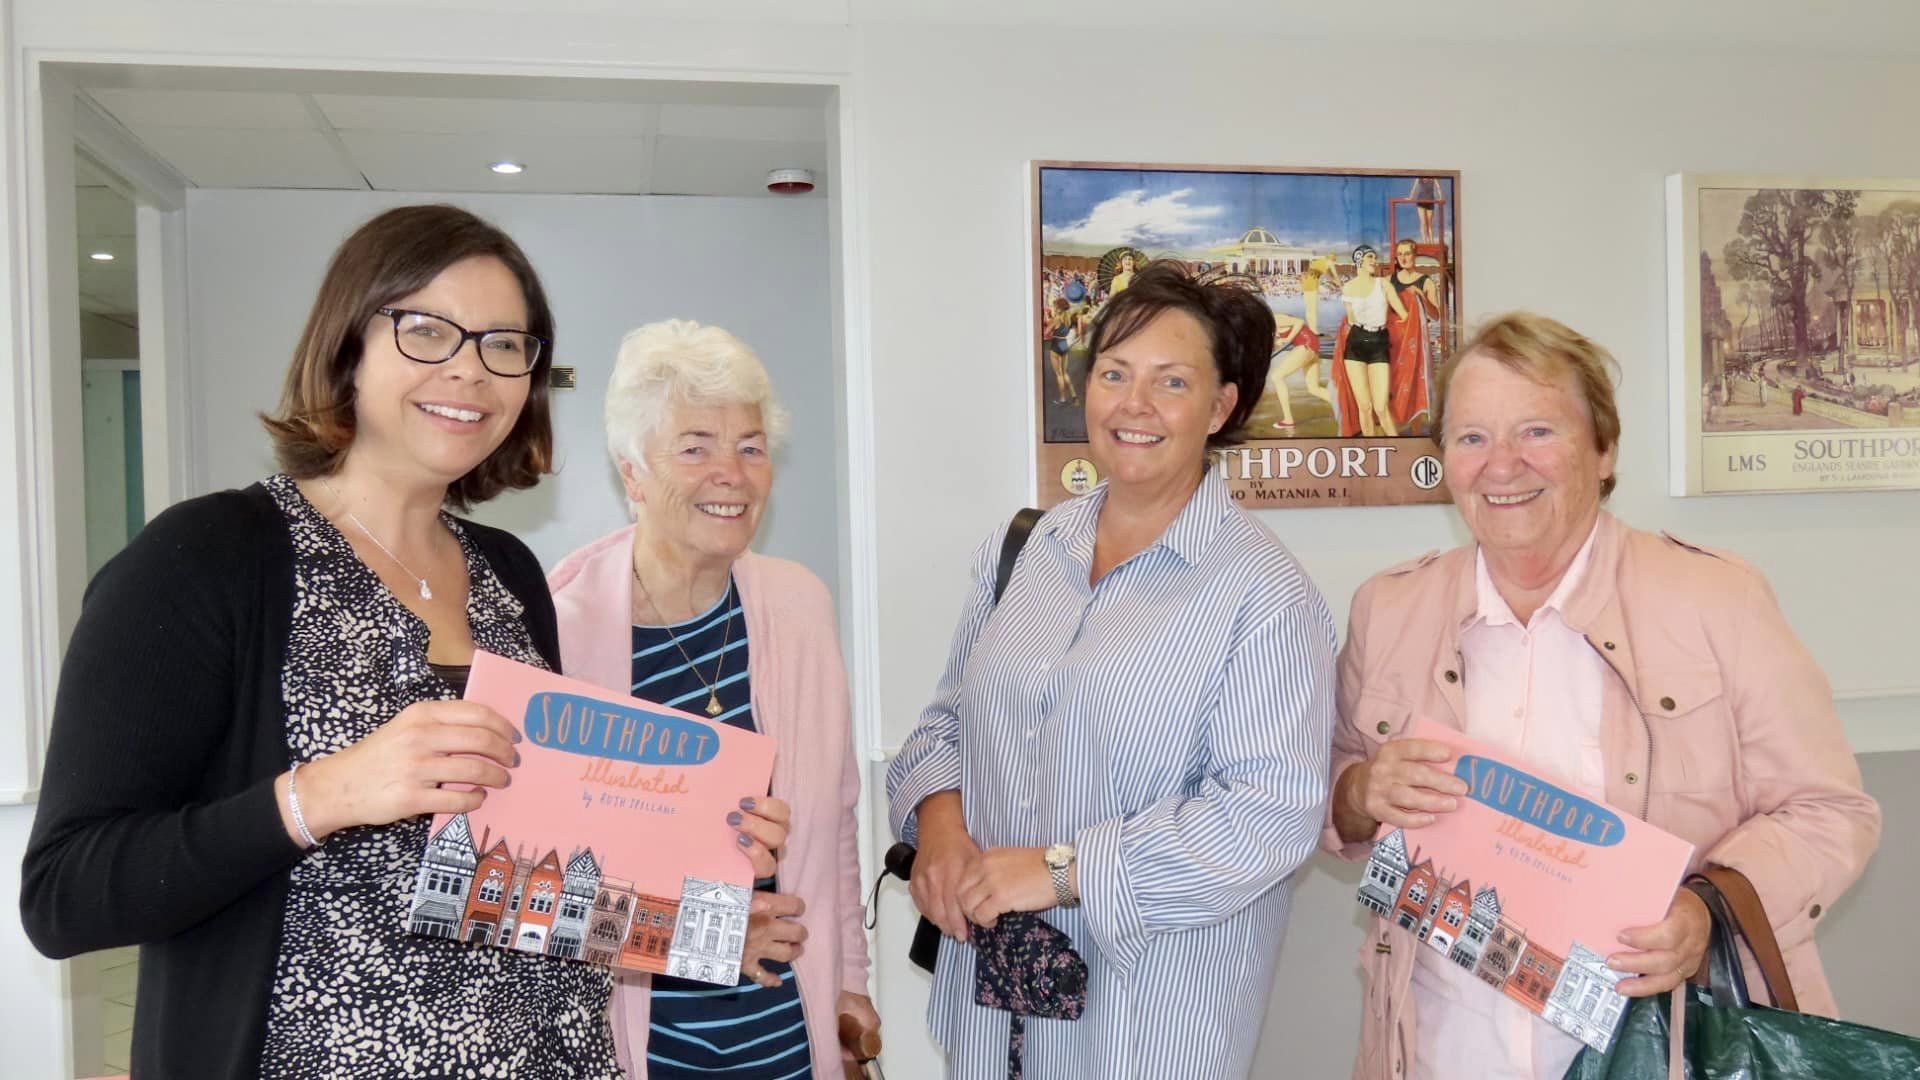 Ruth Spillane held a book launch for 'Southport Illustrated' at Silcock's Pier Family Restaurant in Southport. Ruth left) is pictured with visitors to her book launch. Photo by Andrew Brown Stand Up For Southport